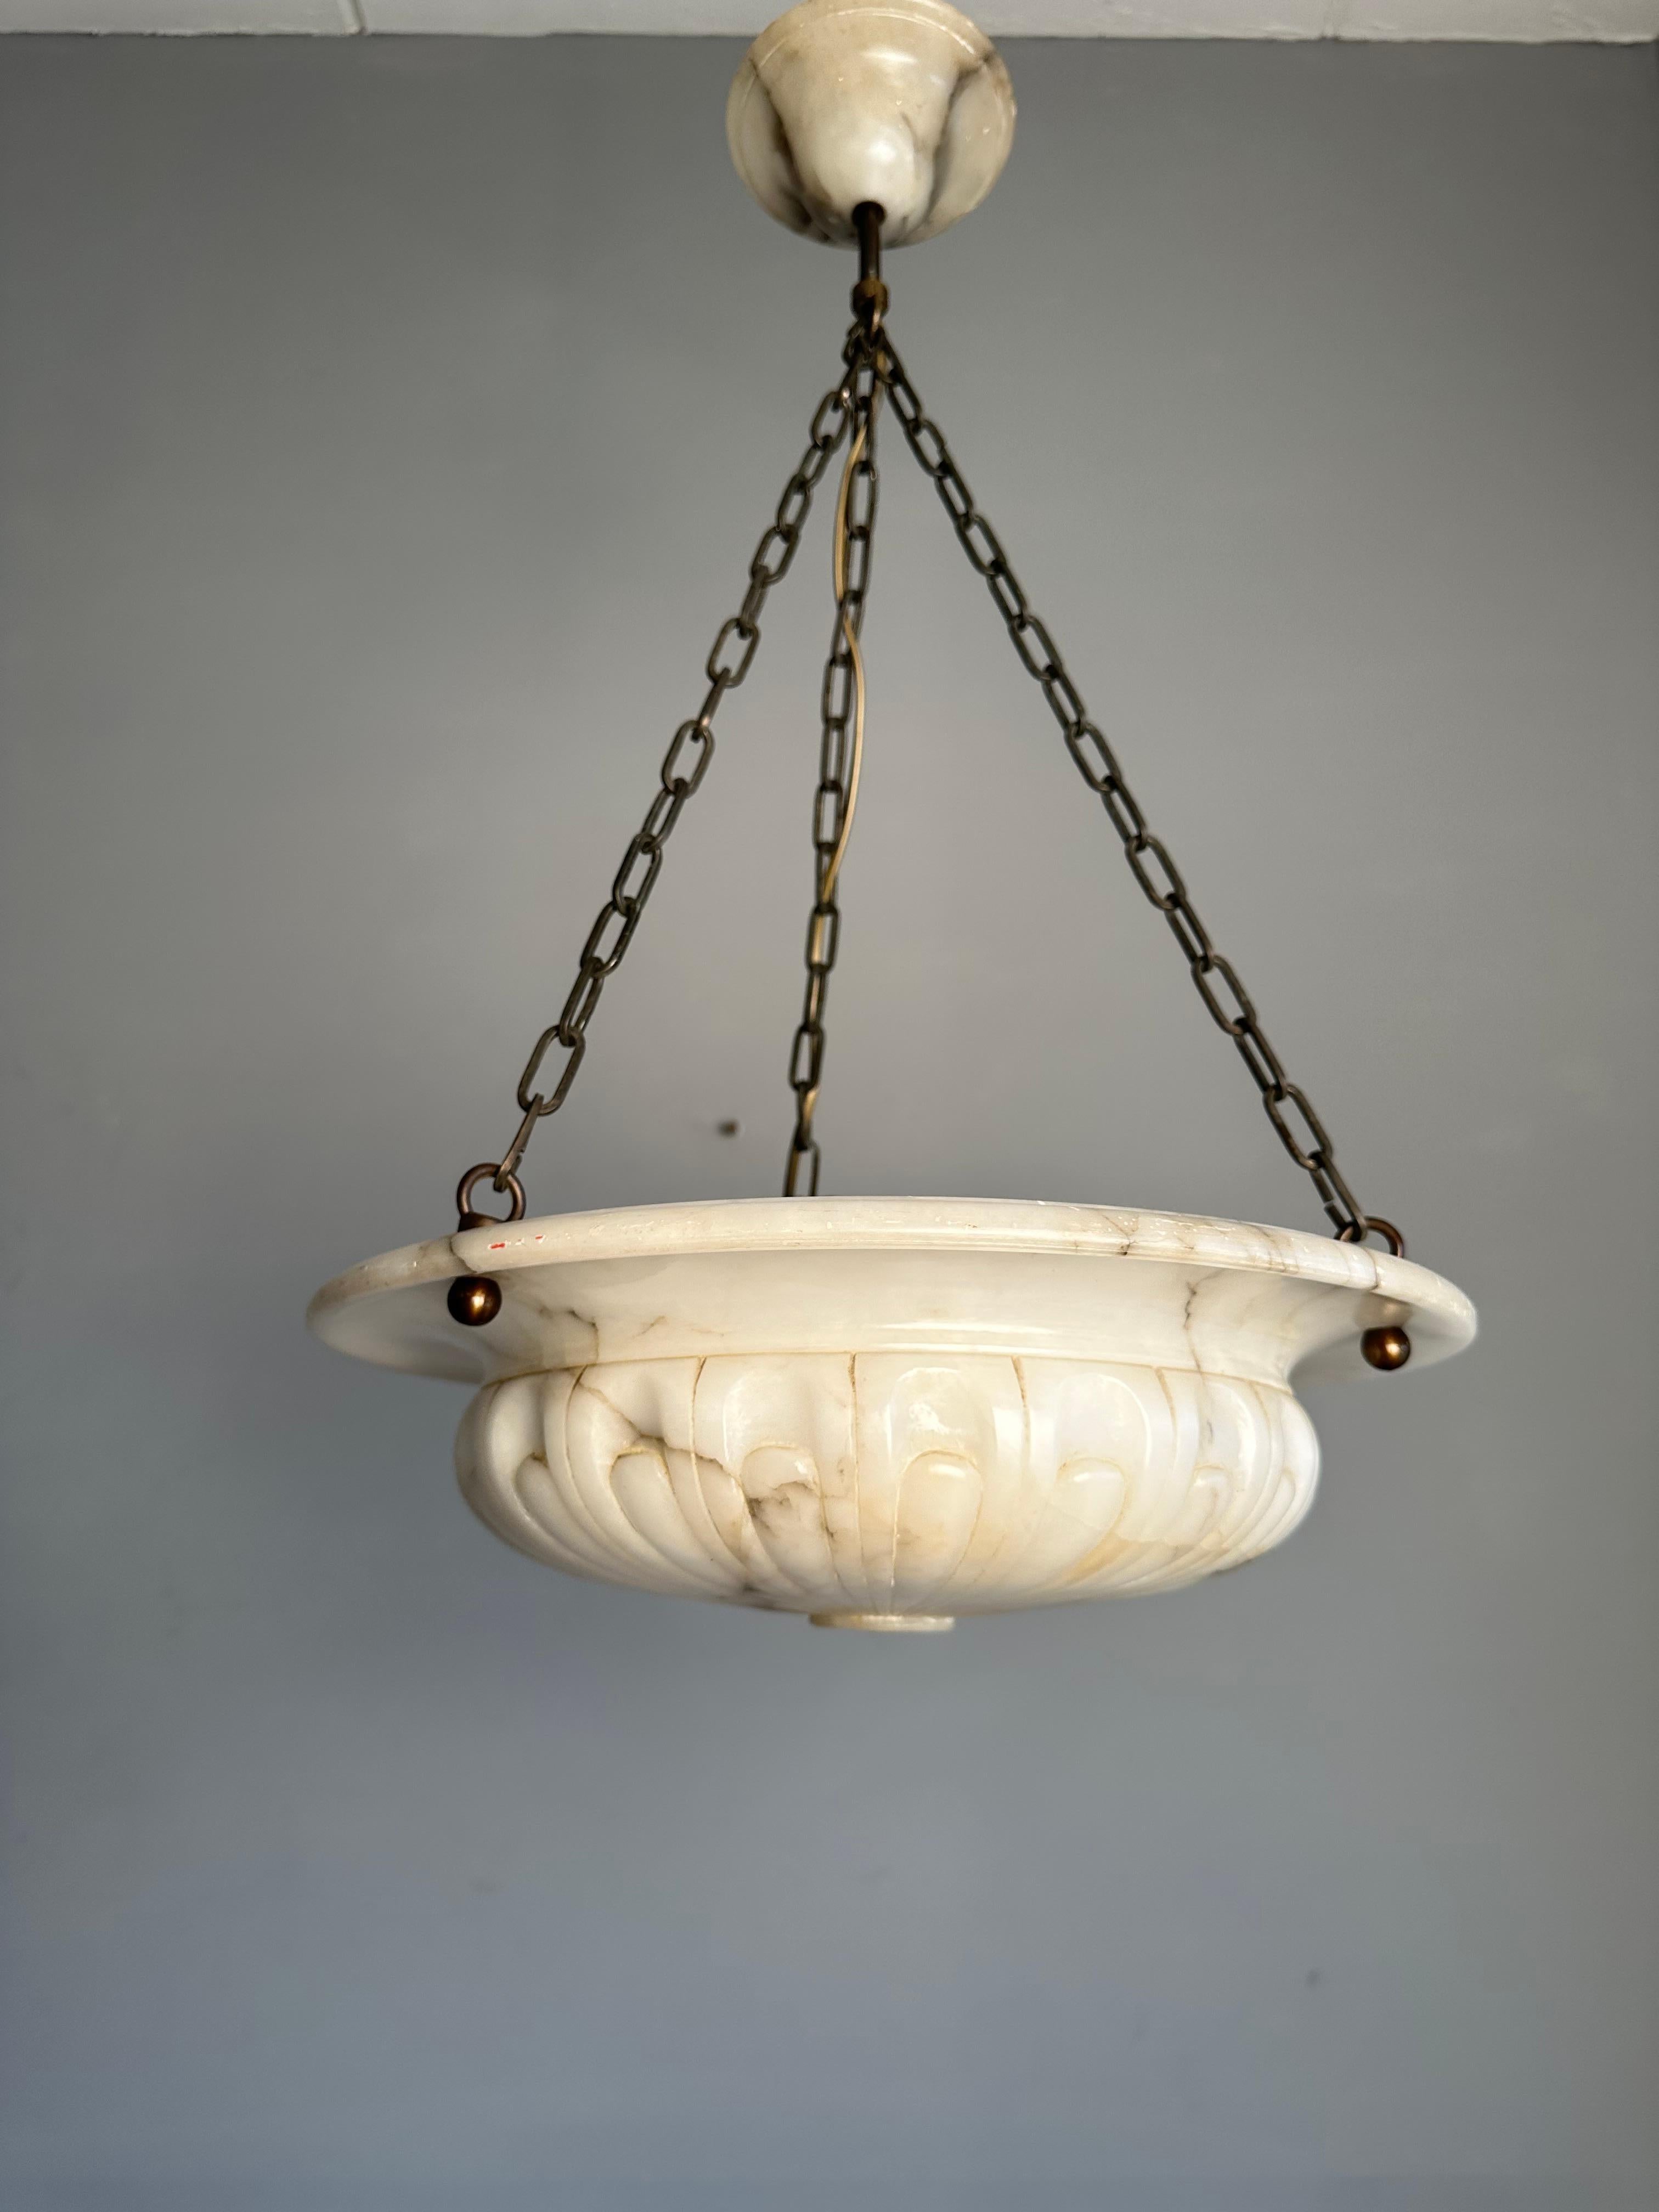 Marvelous antique and classical design light fixture for an entry hall, bedroom or any other room.

With these alabaster pendants being one of our specialities, we always love finding the timeless ones. This particular work of beauty comes with a